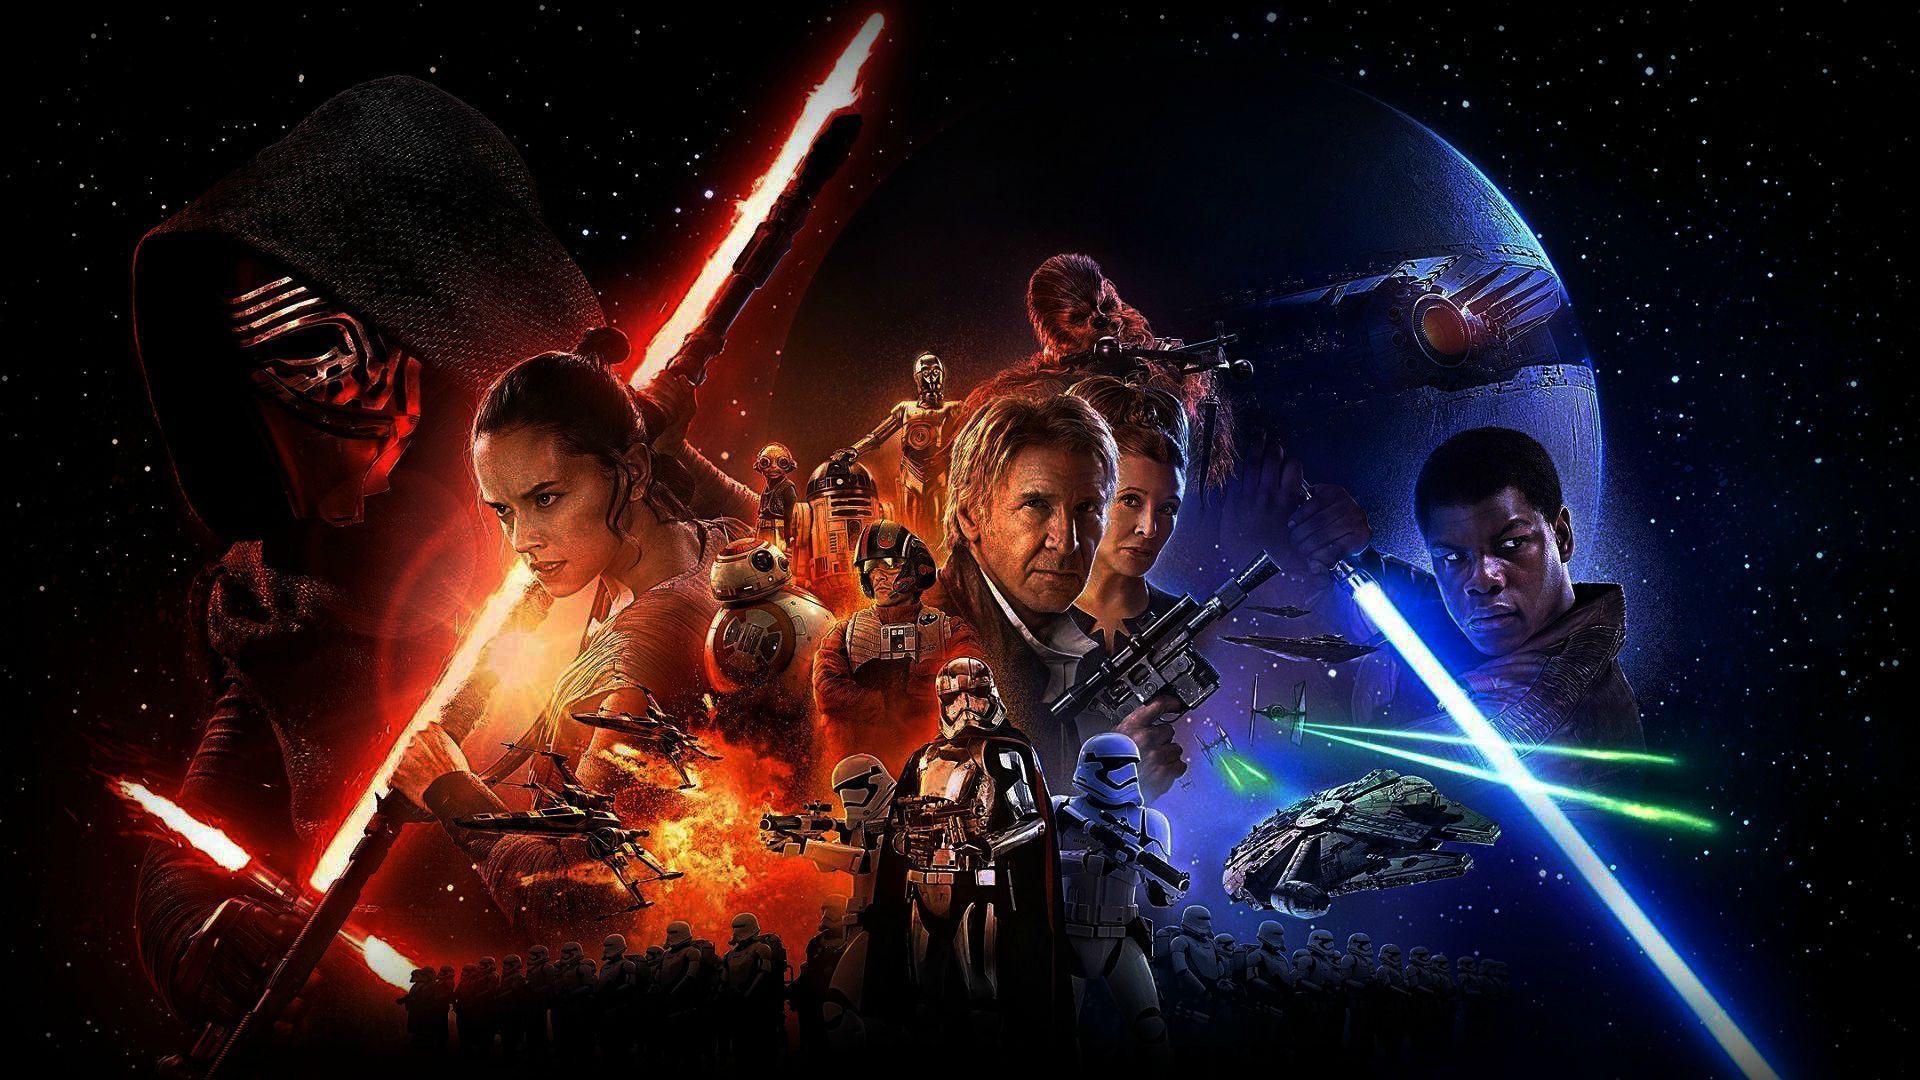 Star Wars - The Force Awakens Poster 1920 x 1080 wallpapers